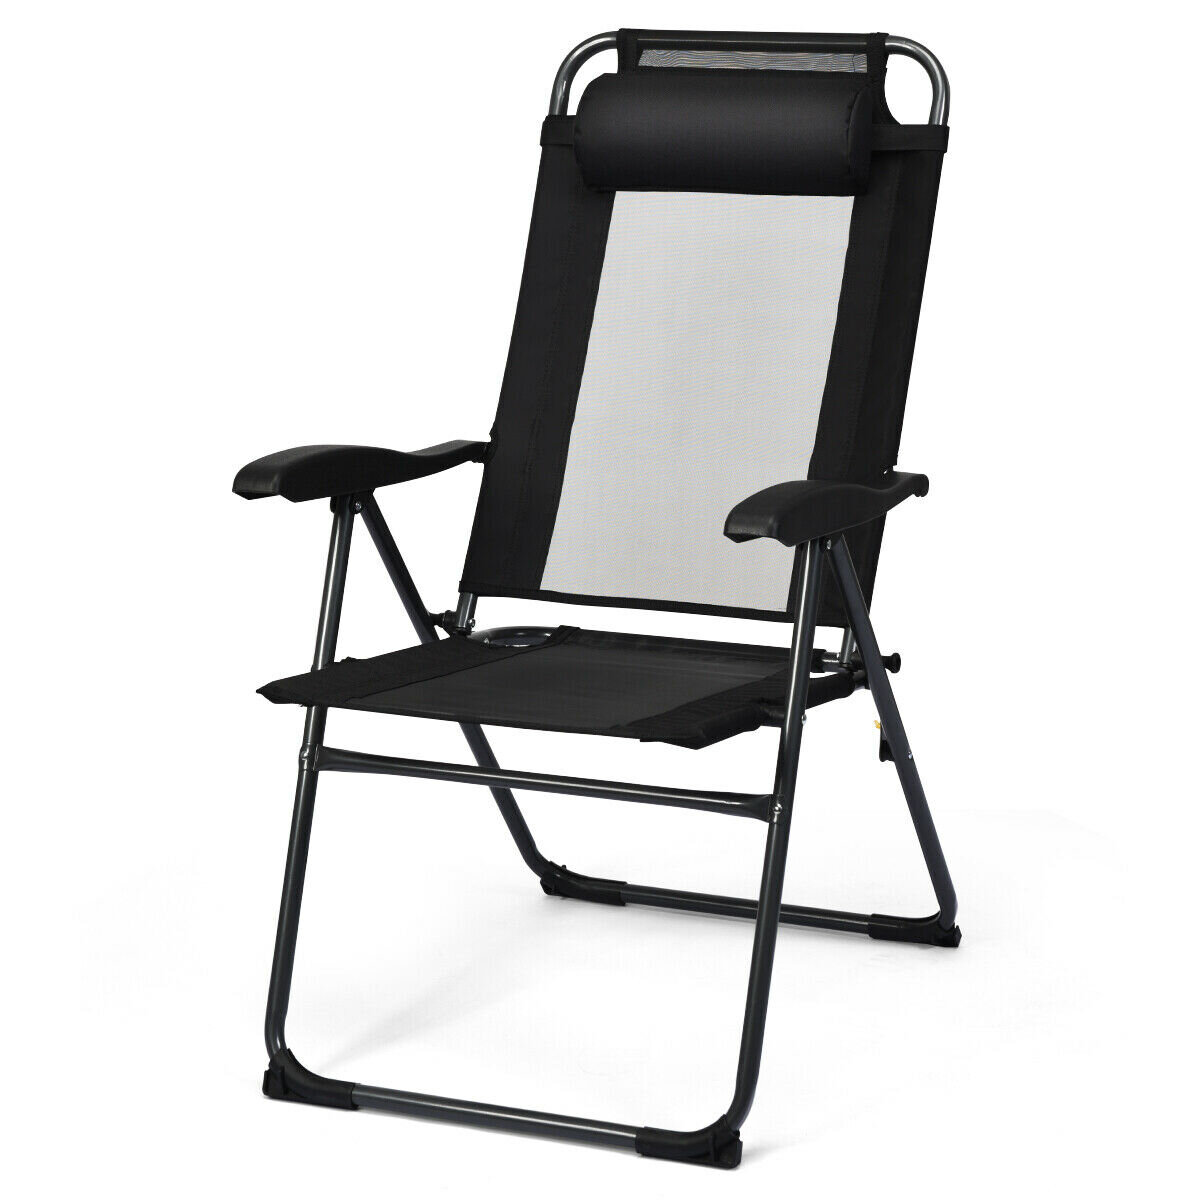 with Cup Holder Tray/Cell Phone Holder Unihome Zero-Gravity-Chair Adjustable Outdoor Chairs Reclining Patio Chair Set of 2 Outdoor Folding Patio Chairs,Gray